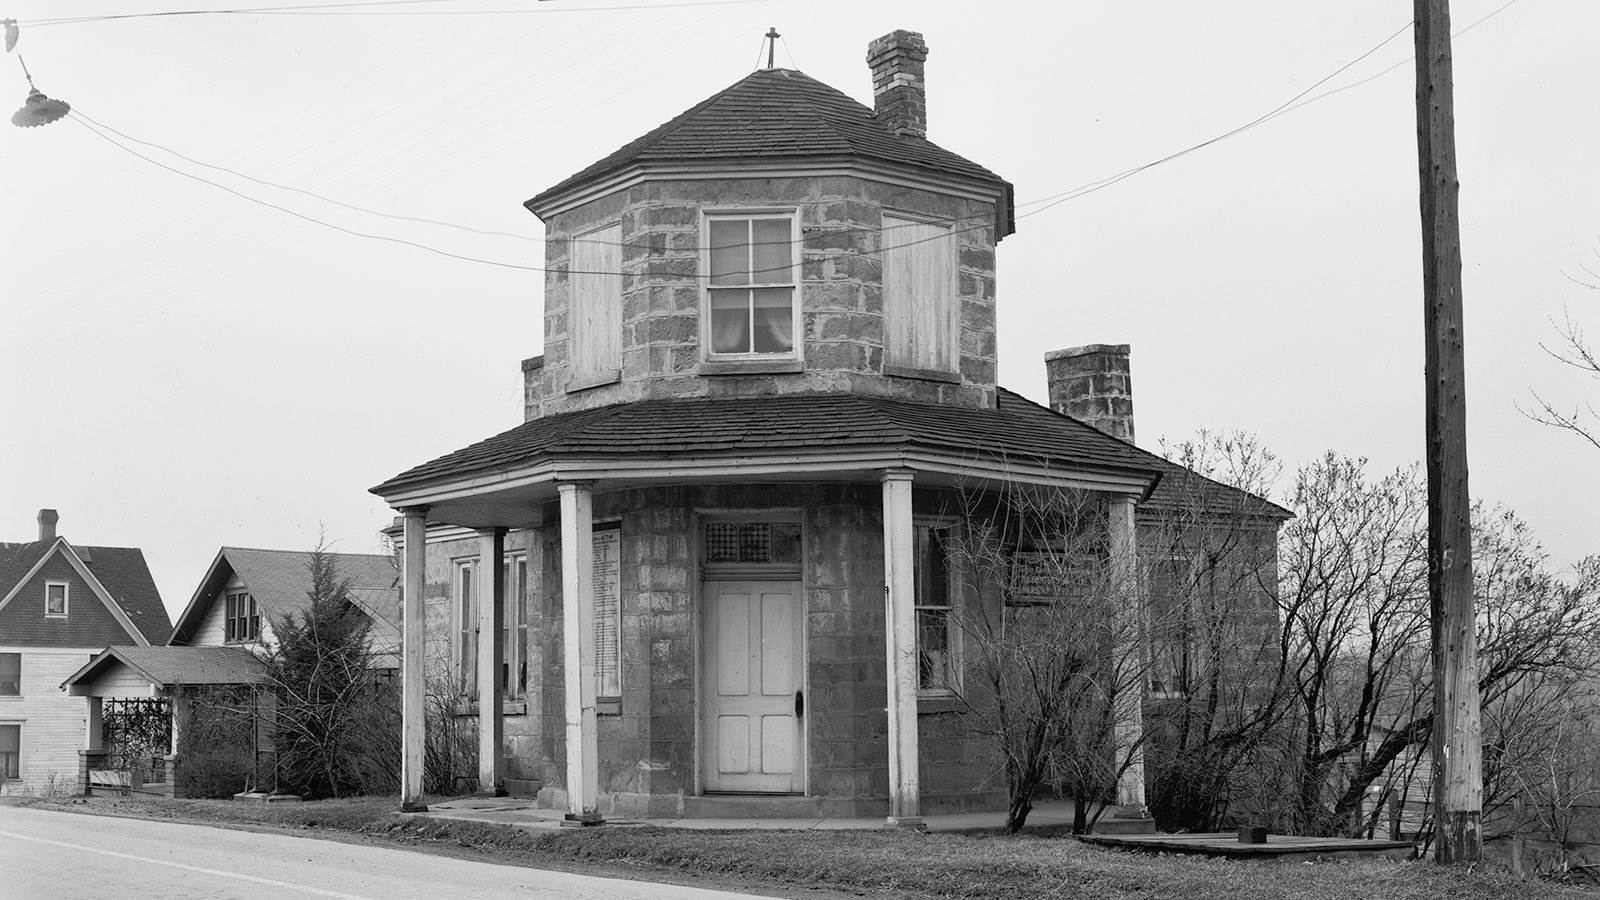 A toll house on the National Road